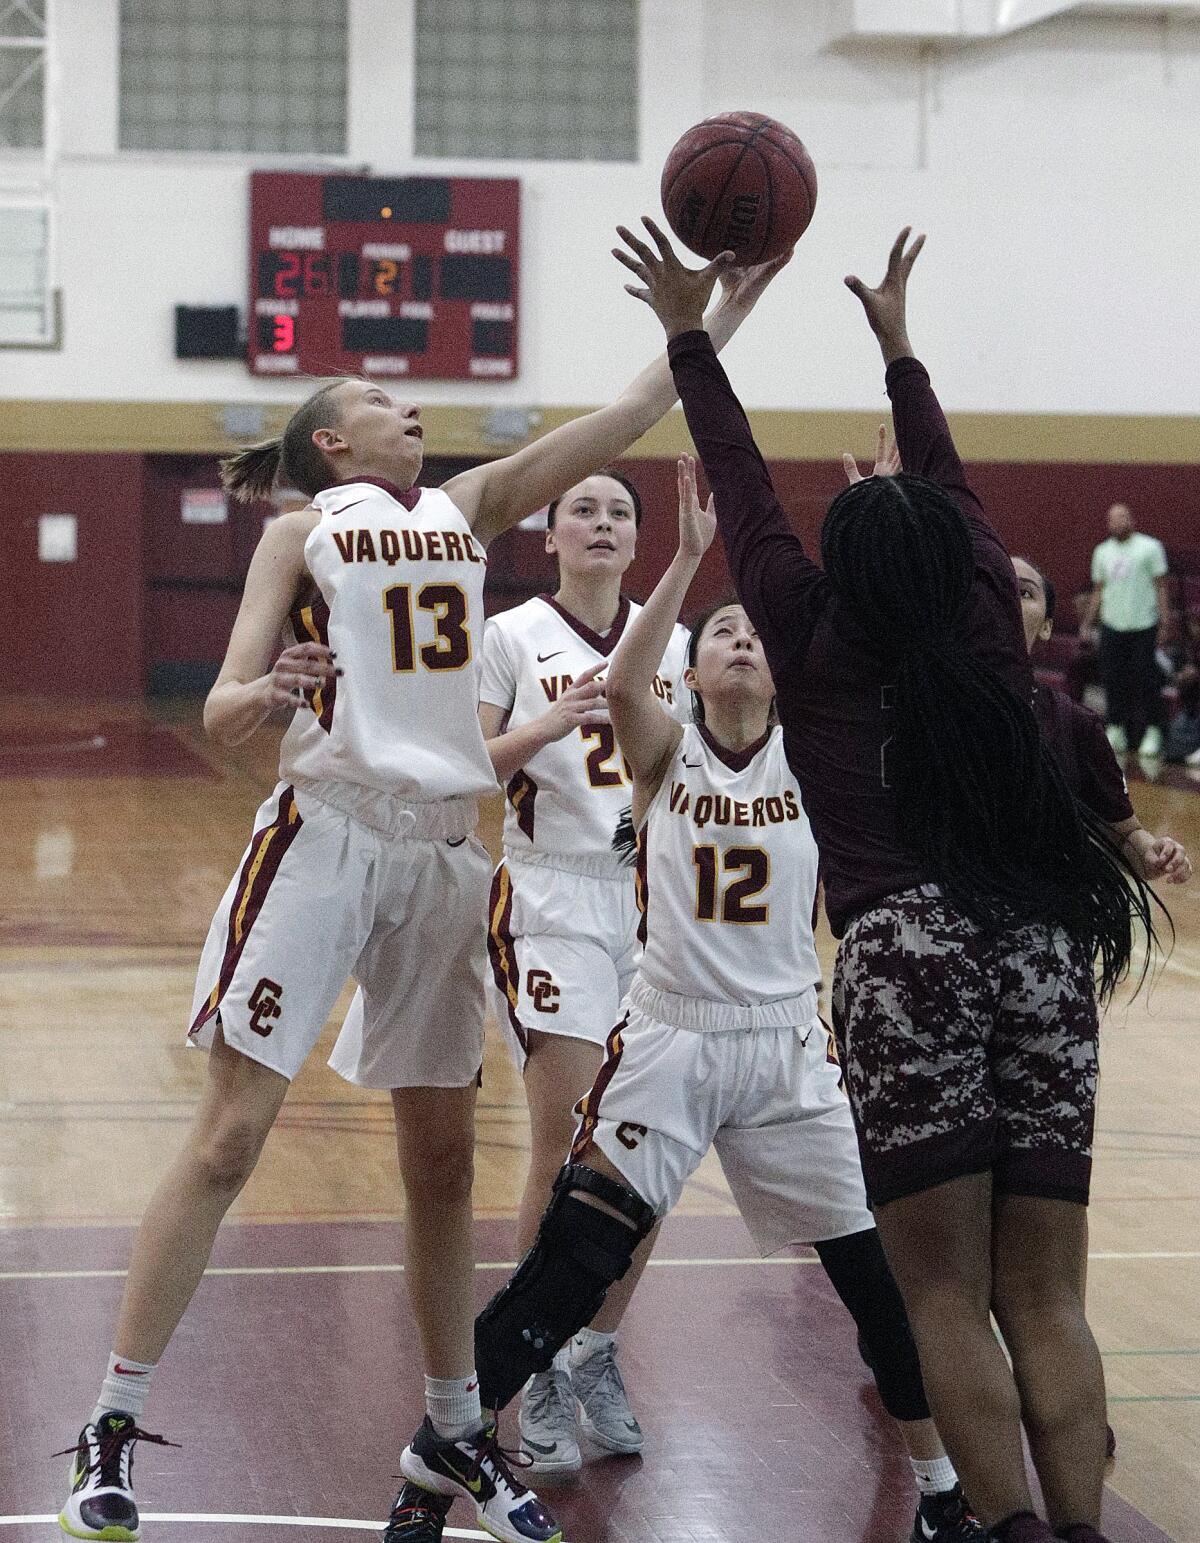 Glendale Community College's Polina Kovaleva reaches out for a rebound against Antelope Valley's Erin Williams in a Western State Conference women's basketball game at Glendale Community College on Wednesday, January 22, 2020.